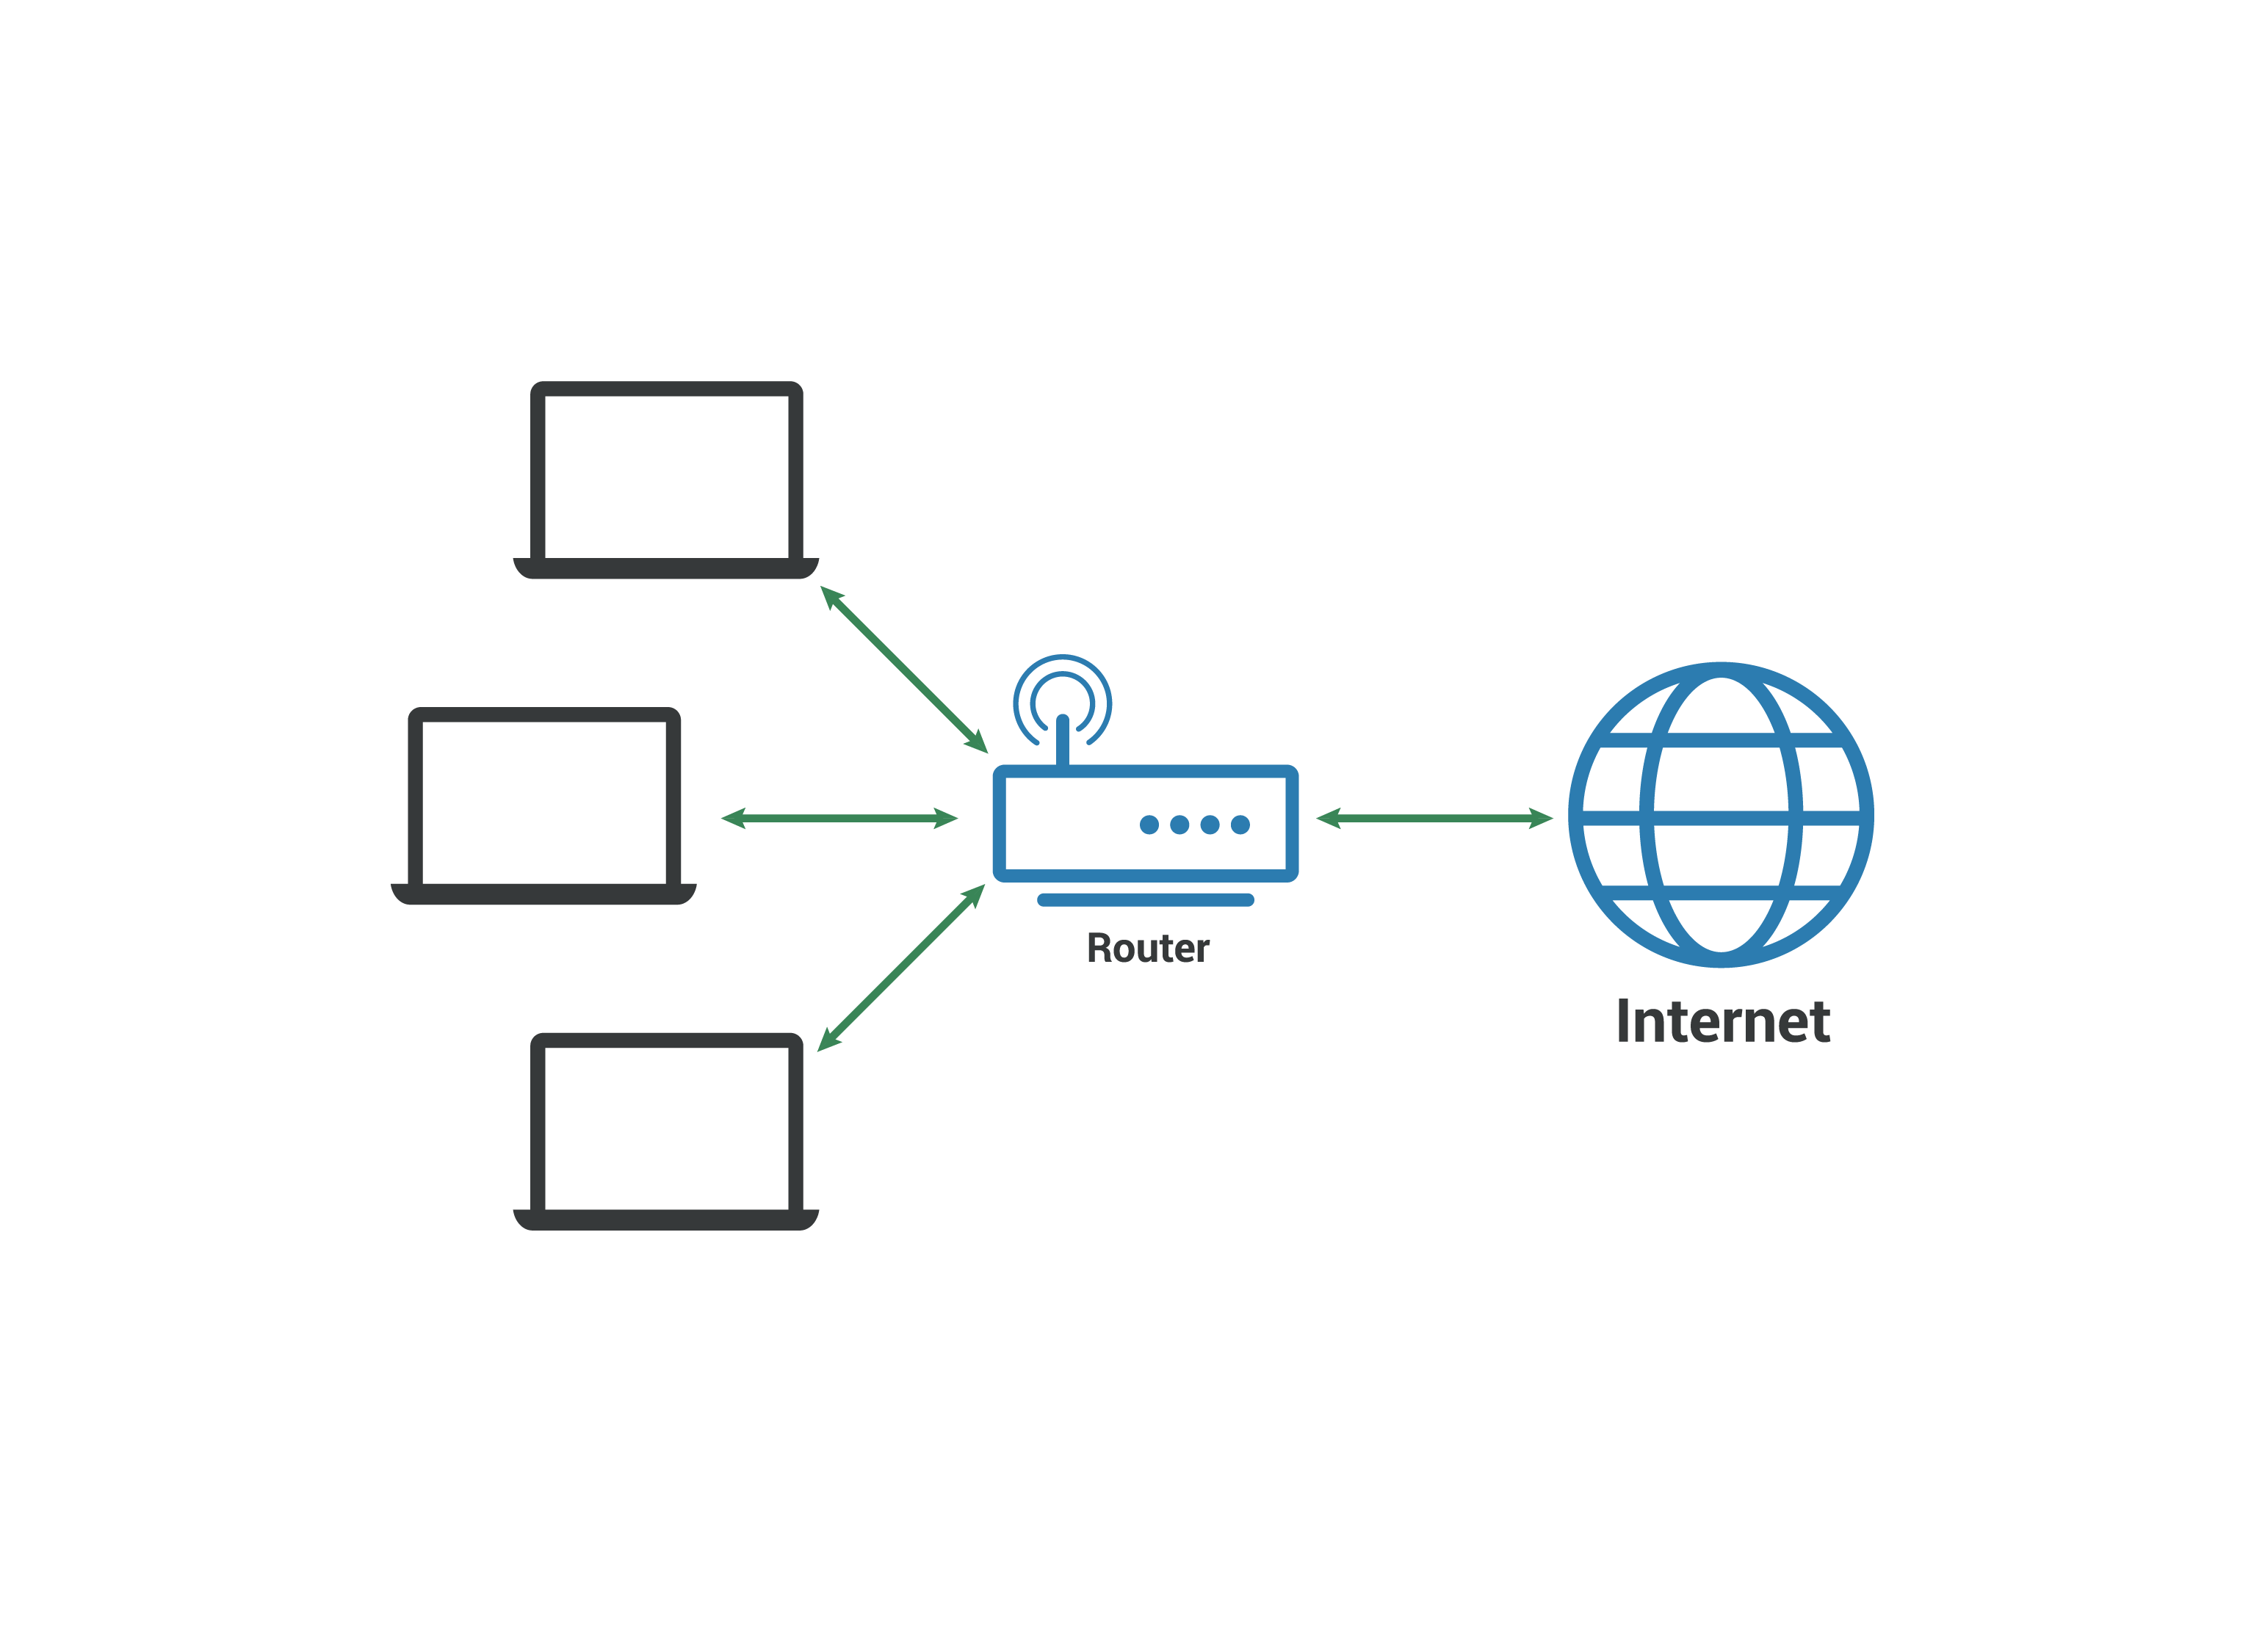 Local Area Network LAN - Computers connect to router which connects to Internet